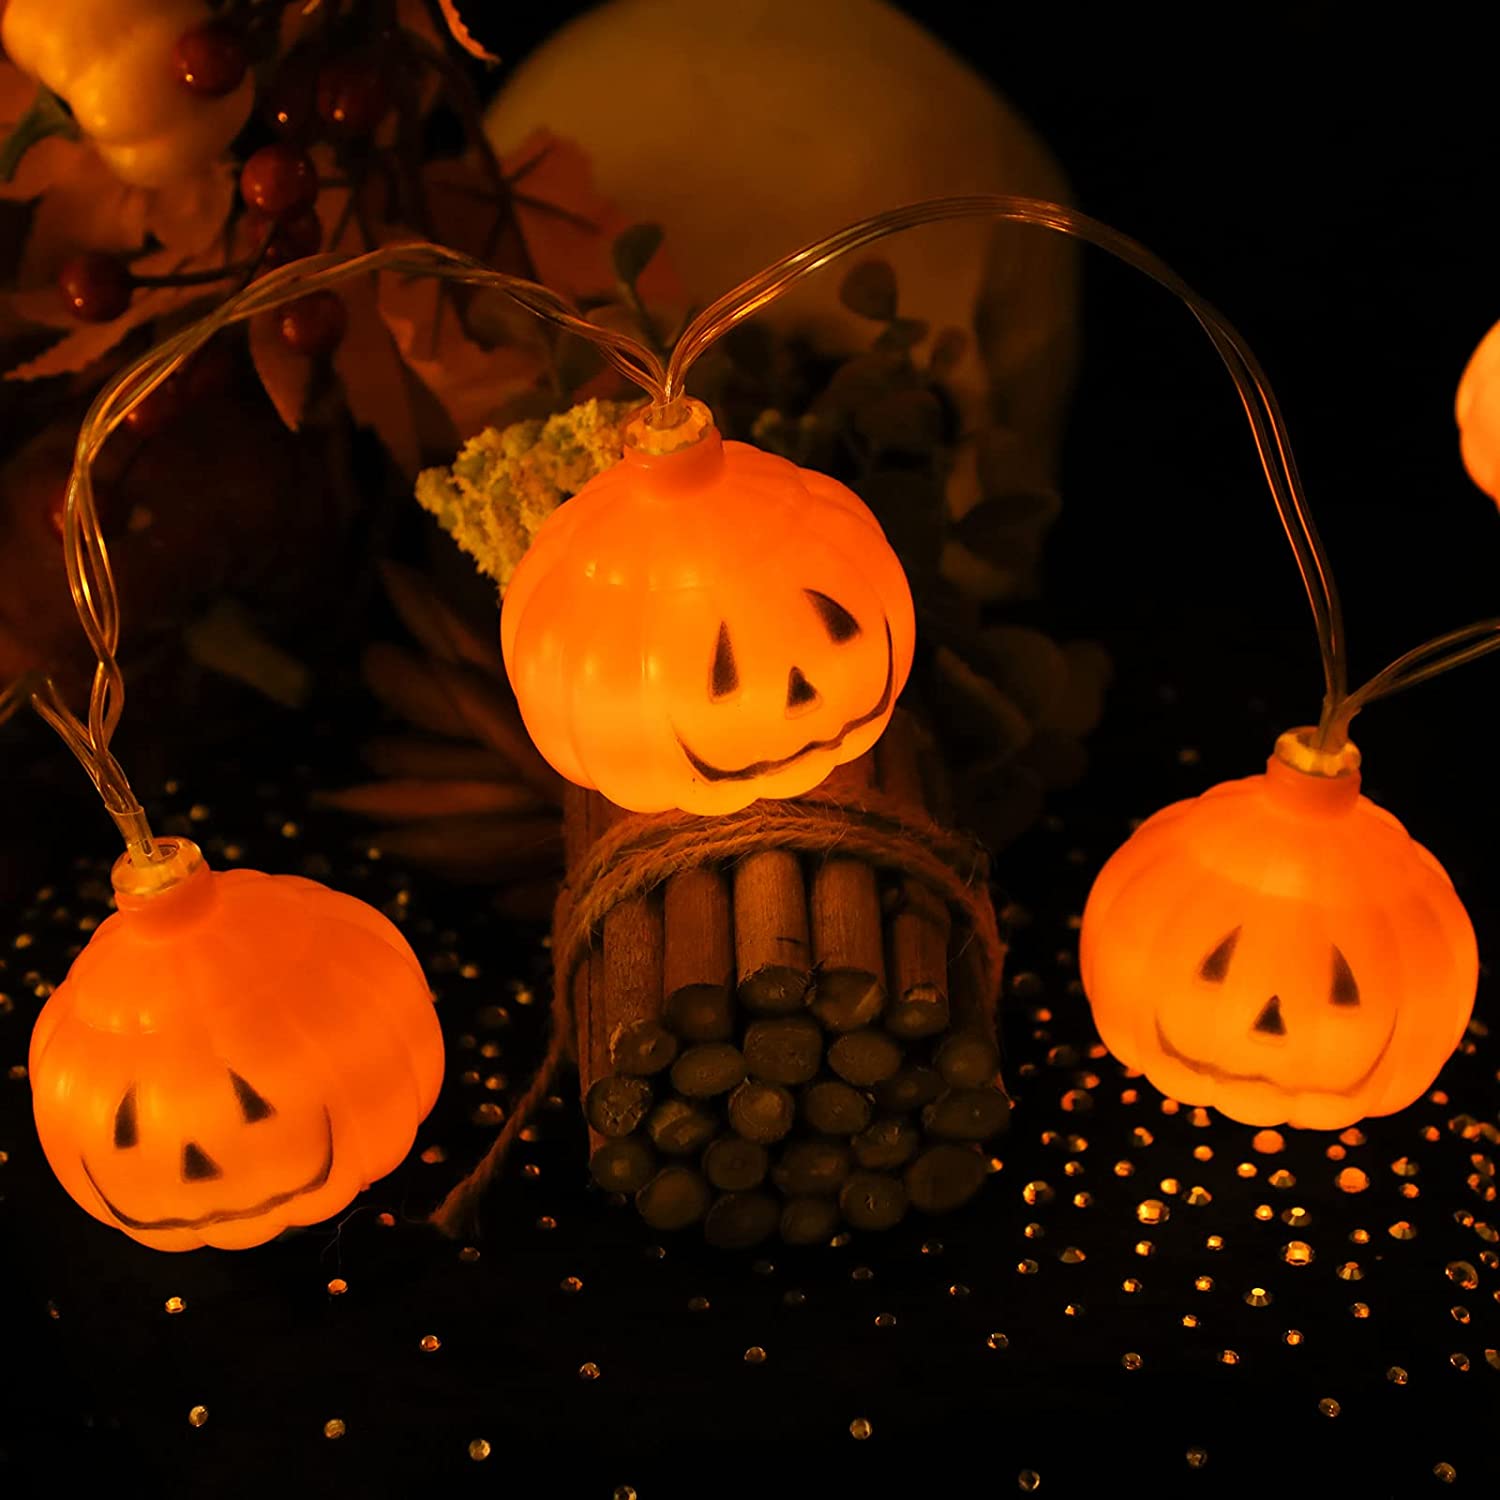 Halloween Decorations And Lights Wallpapers - Wallpaper Cave